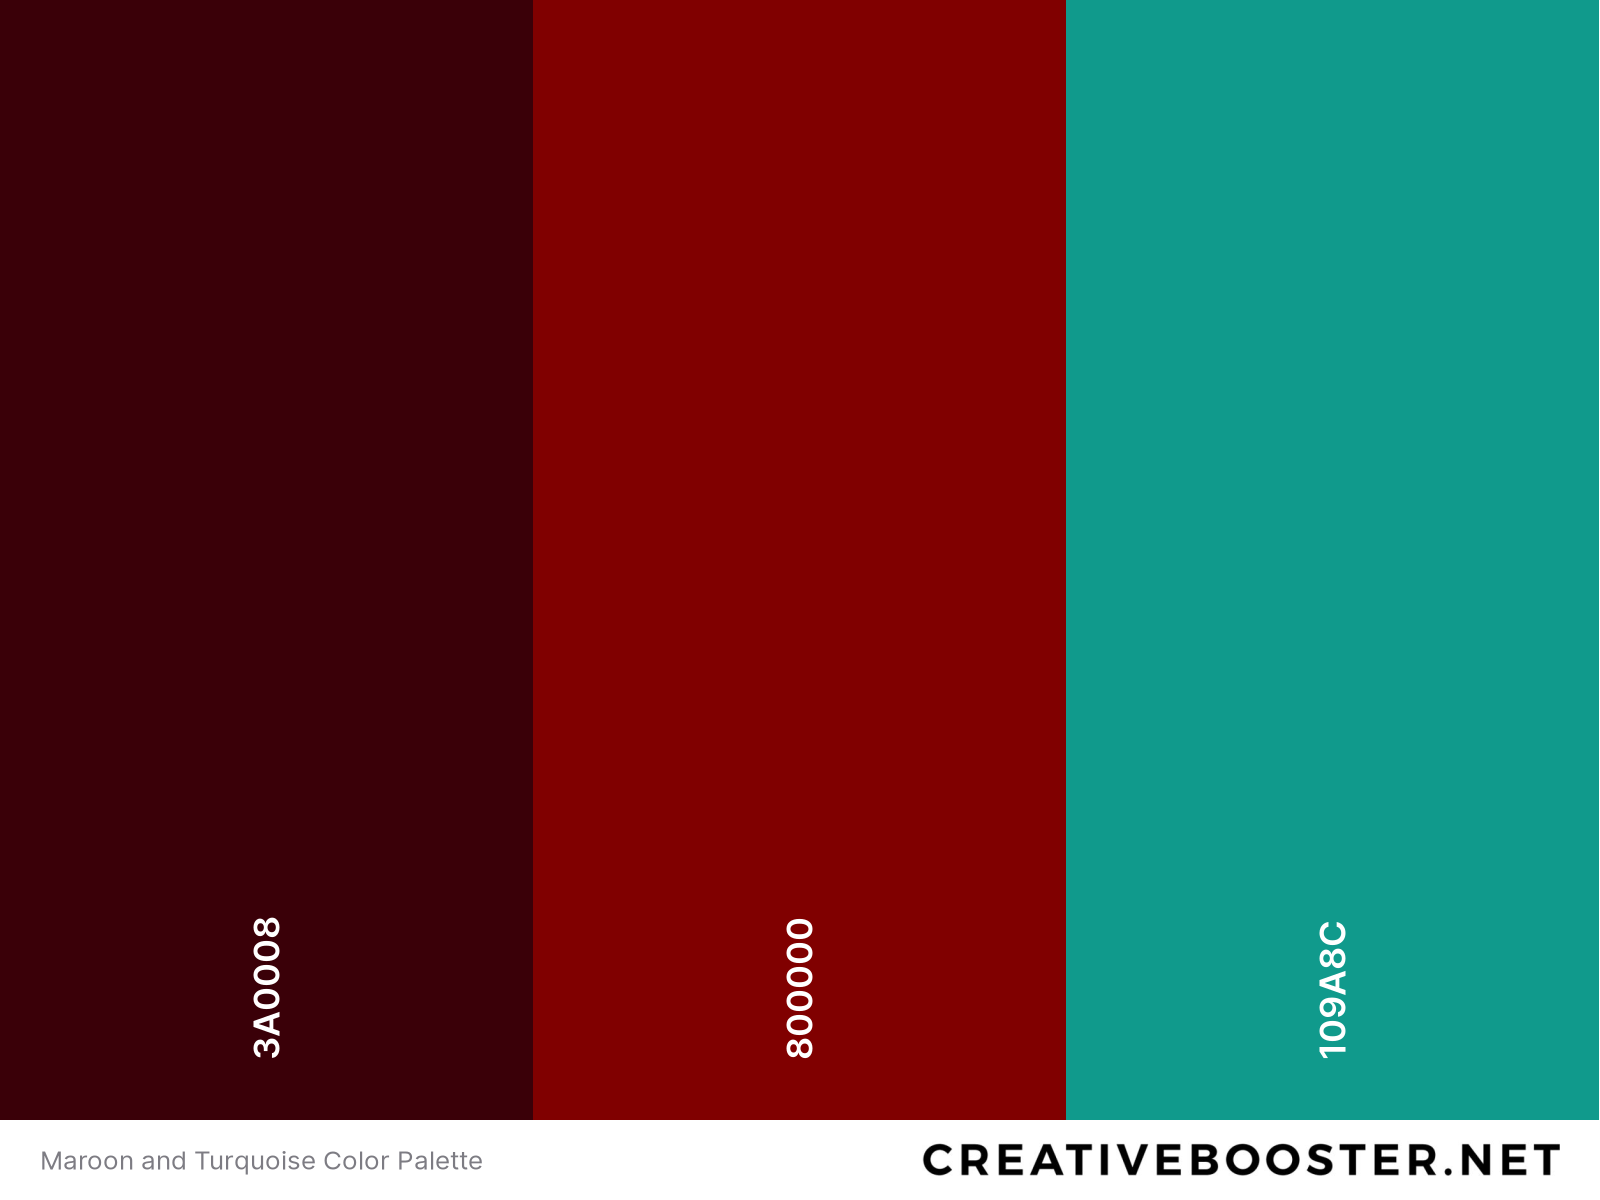 Maroon and Turquoise Color Palette